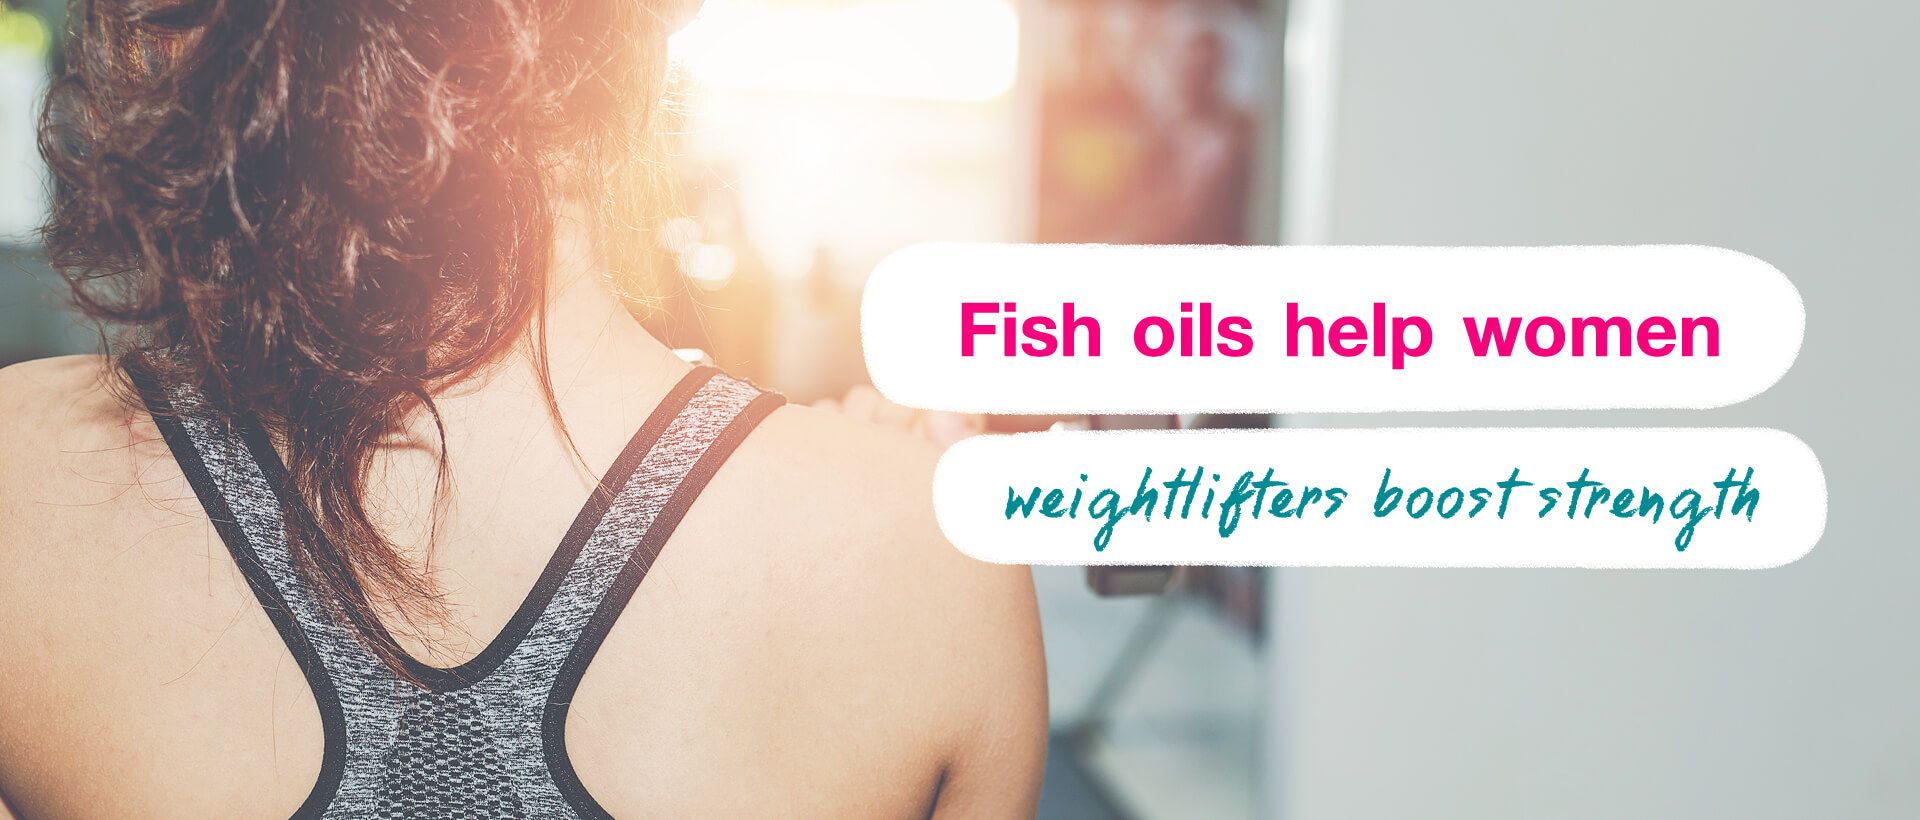 Fish oils helps women weightlifters boost strength